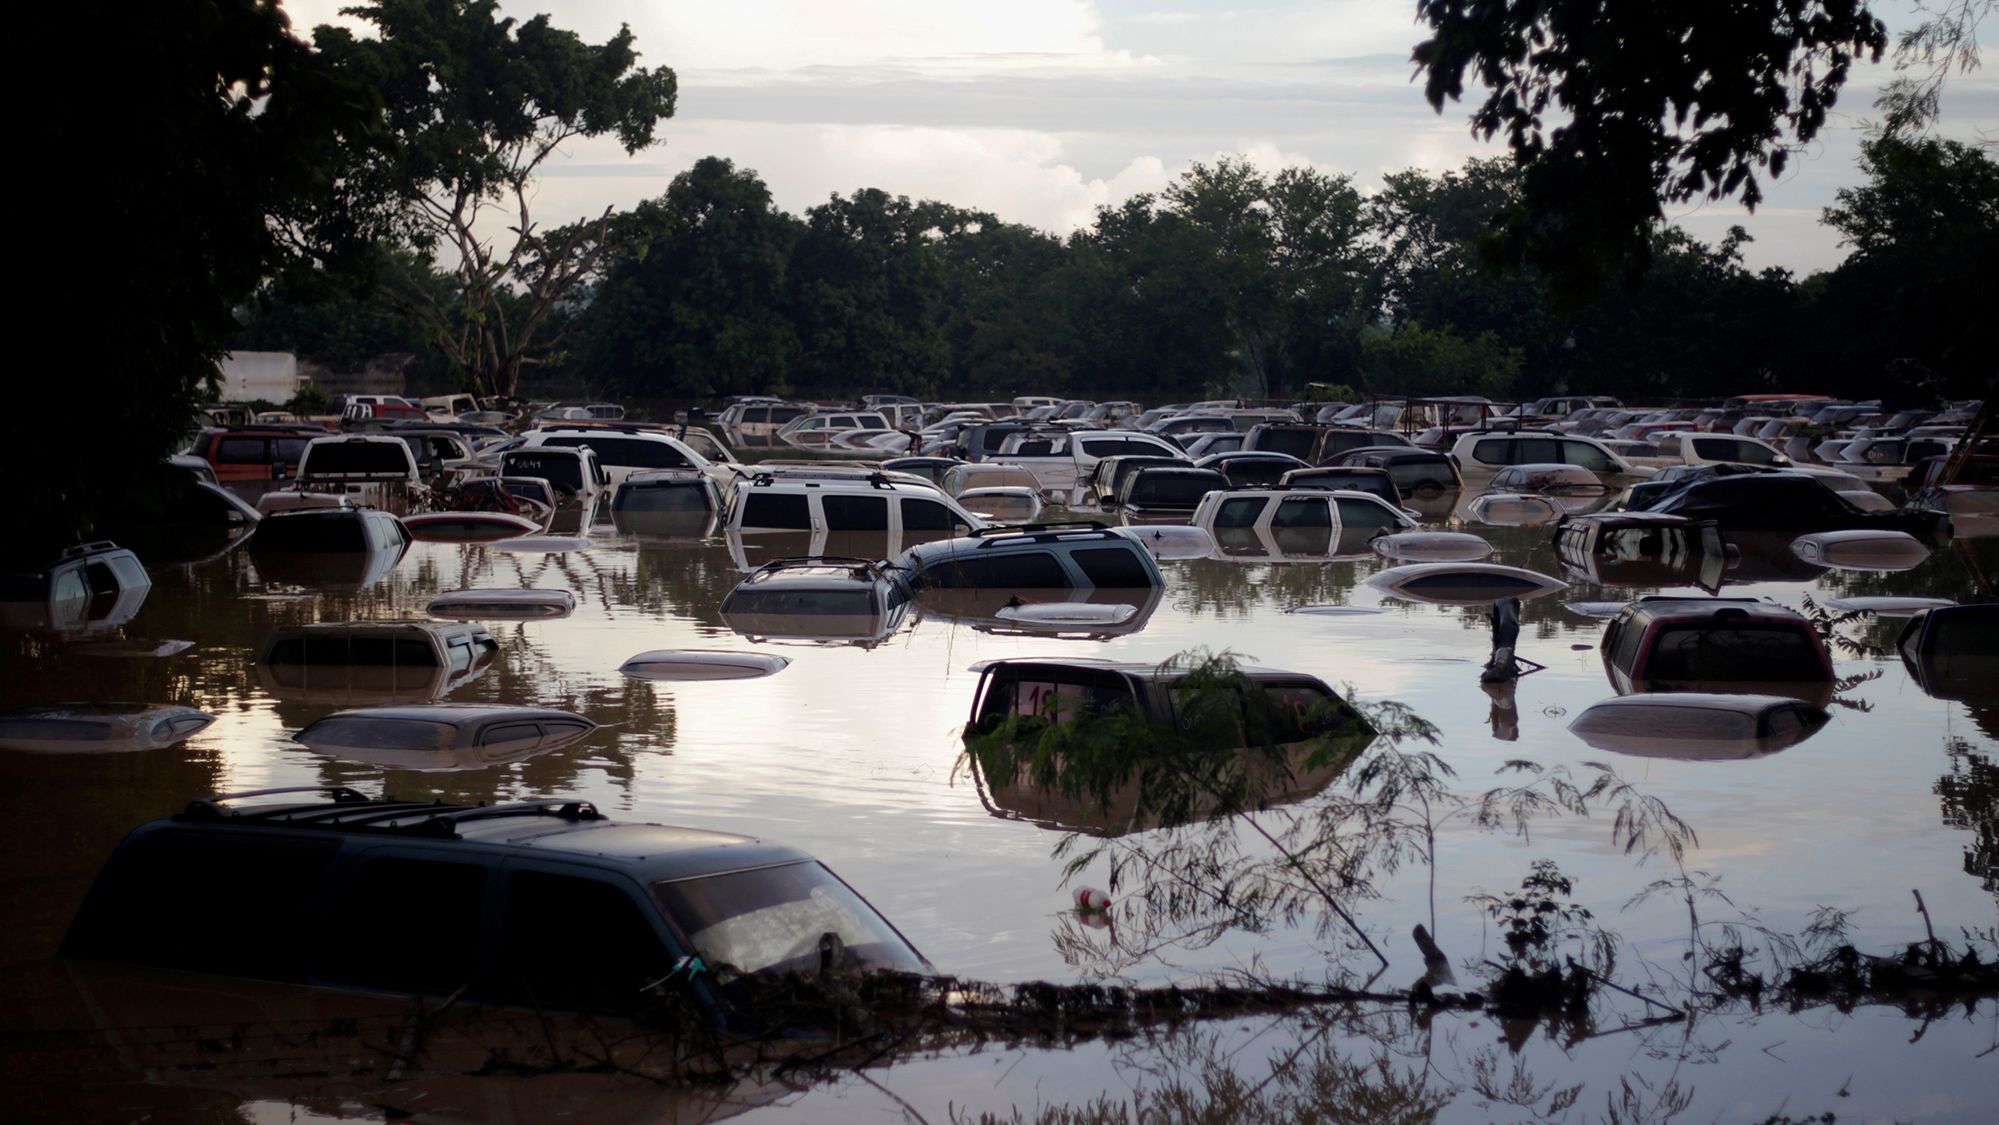 Vehicles submerged after heavy rain caused by Storm Iota, in La Lima, Honduras on November 19, 2020.